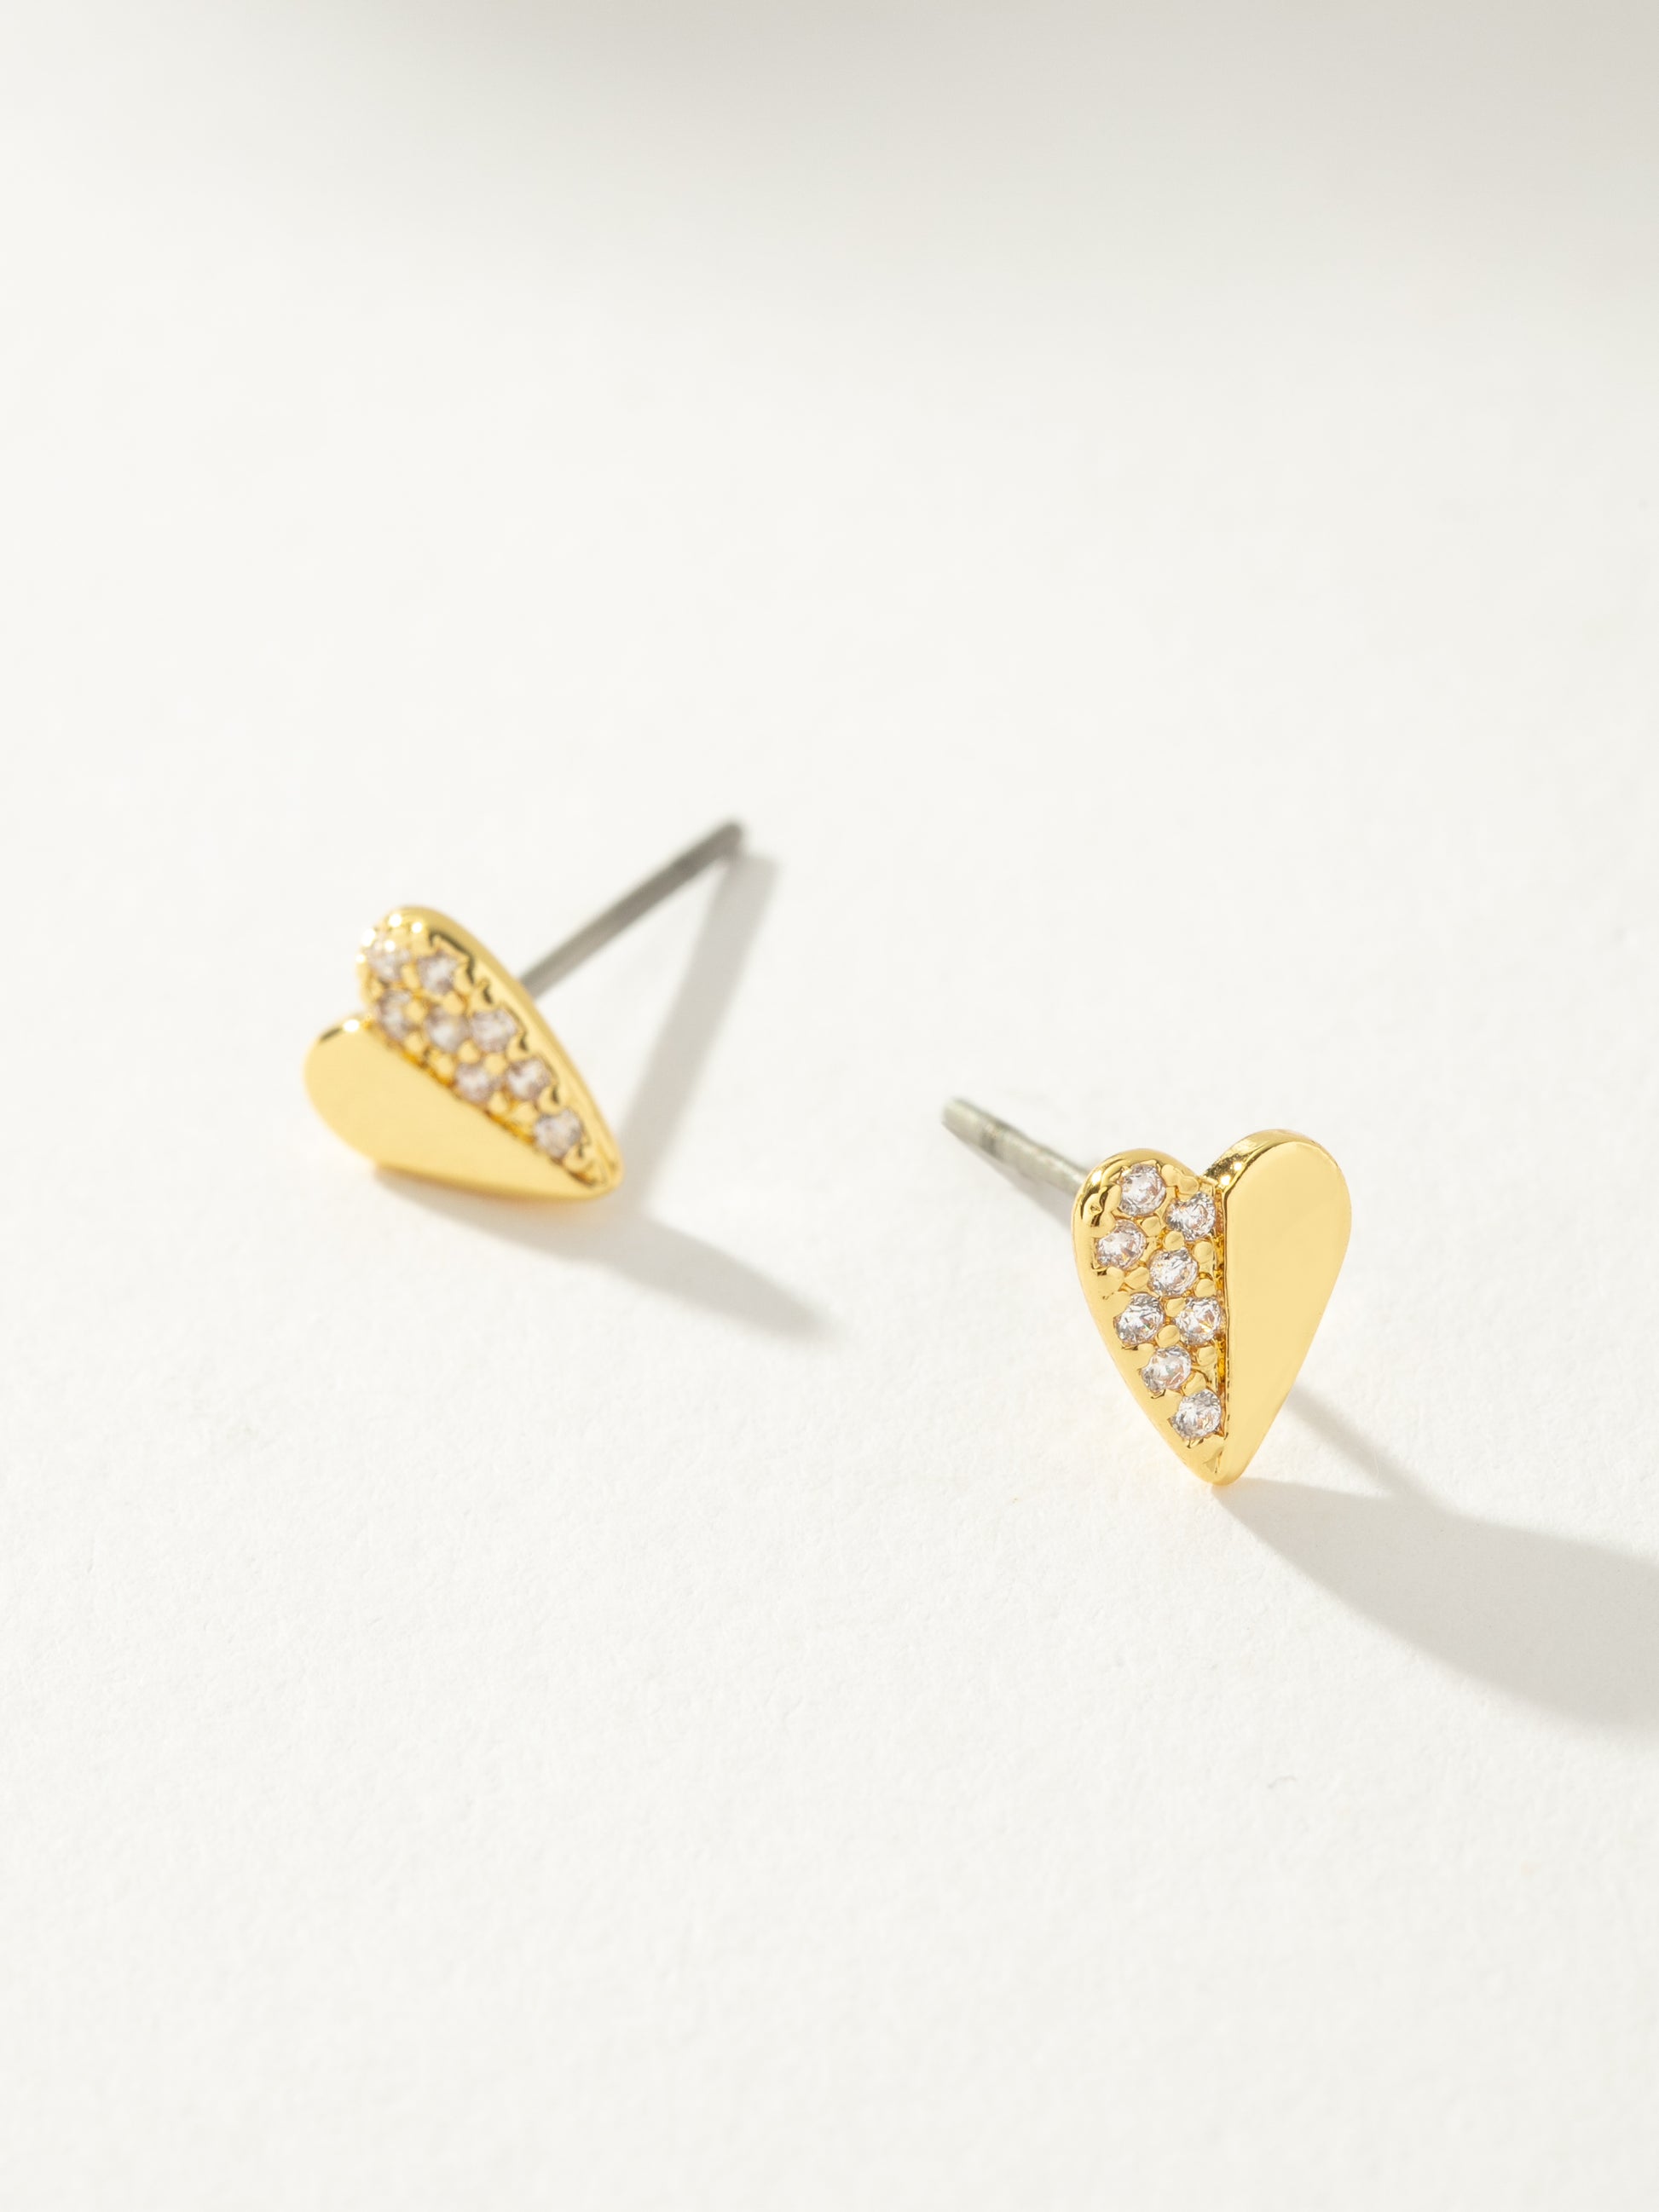 Other Half Heart Stud Earrings | Gold | Product Image | Uncommon James